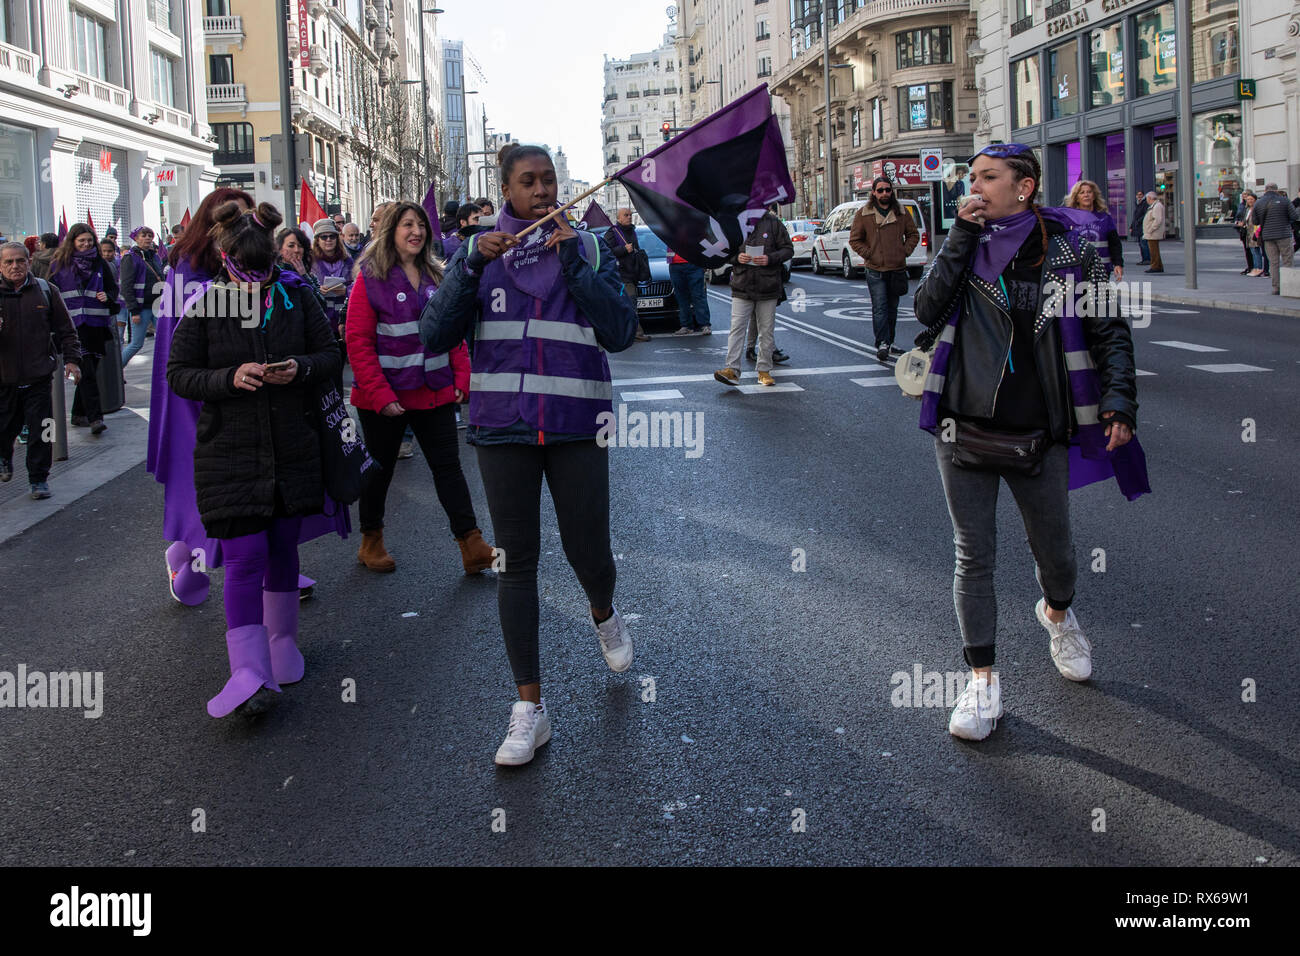 Demonstrators seen at the main street of Madrid the Gran Via during women's day. Spain celebrates International Women's Day with a women's general strike and countless protests with events around the country. Stock Photo